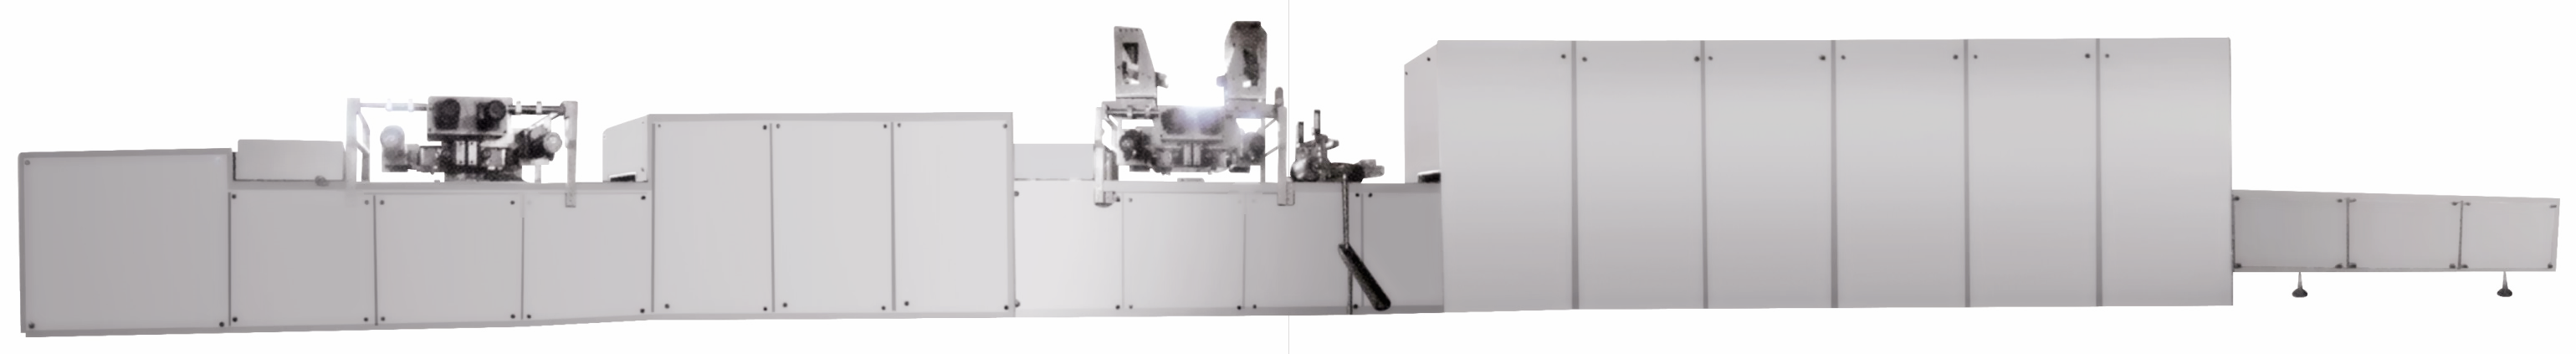 PD150 Automatic Chocolate Moulding Line Machine, Chocolate Bar Depositing Line, Chocolate Pouring Machine Equipment 1